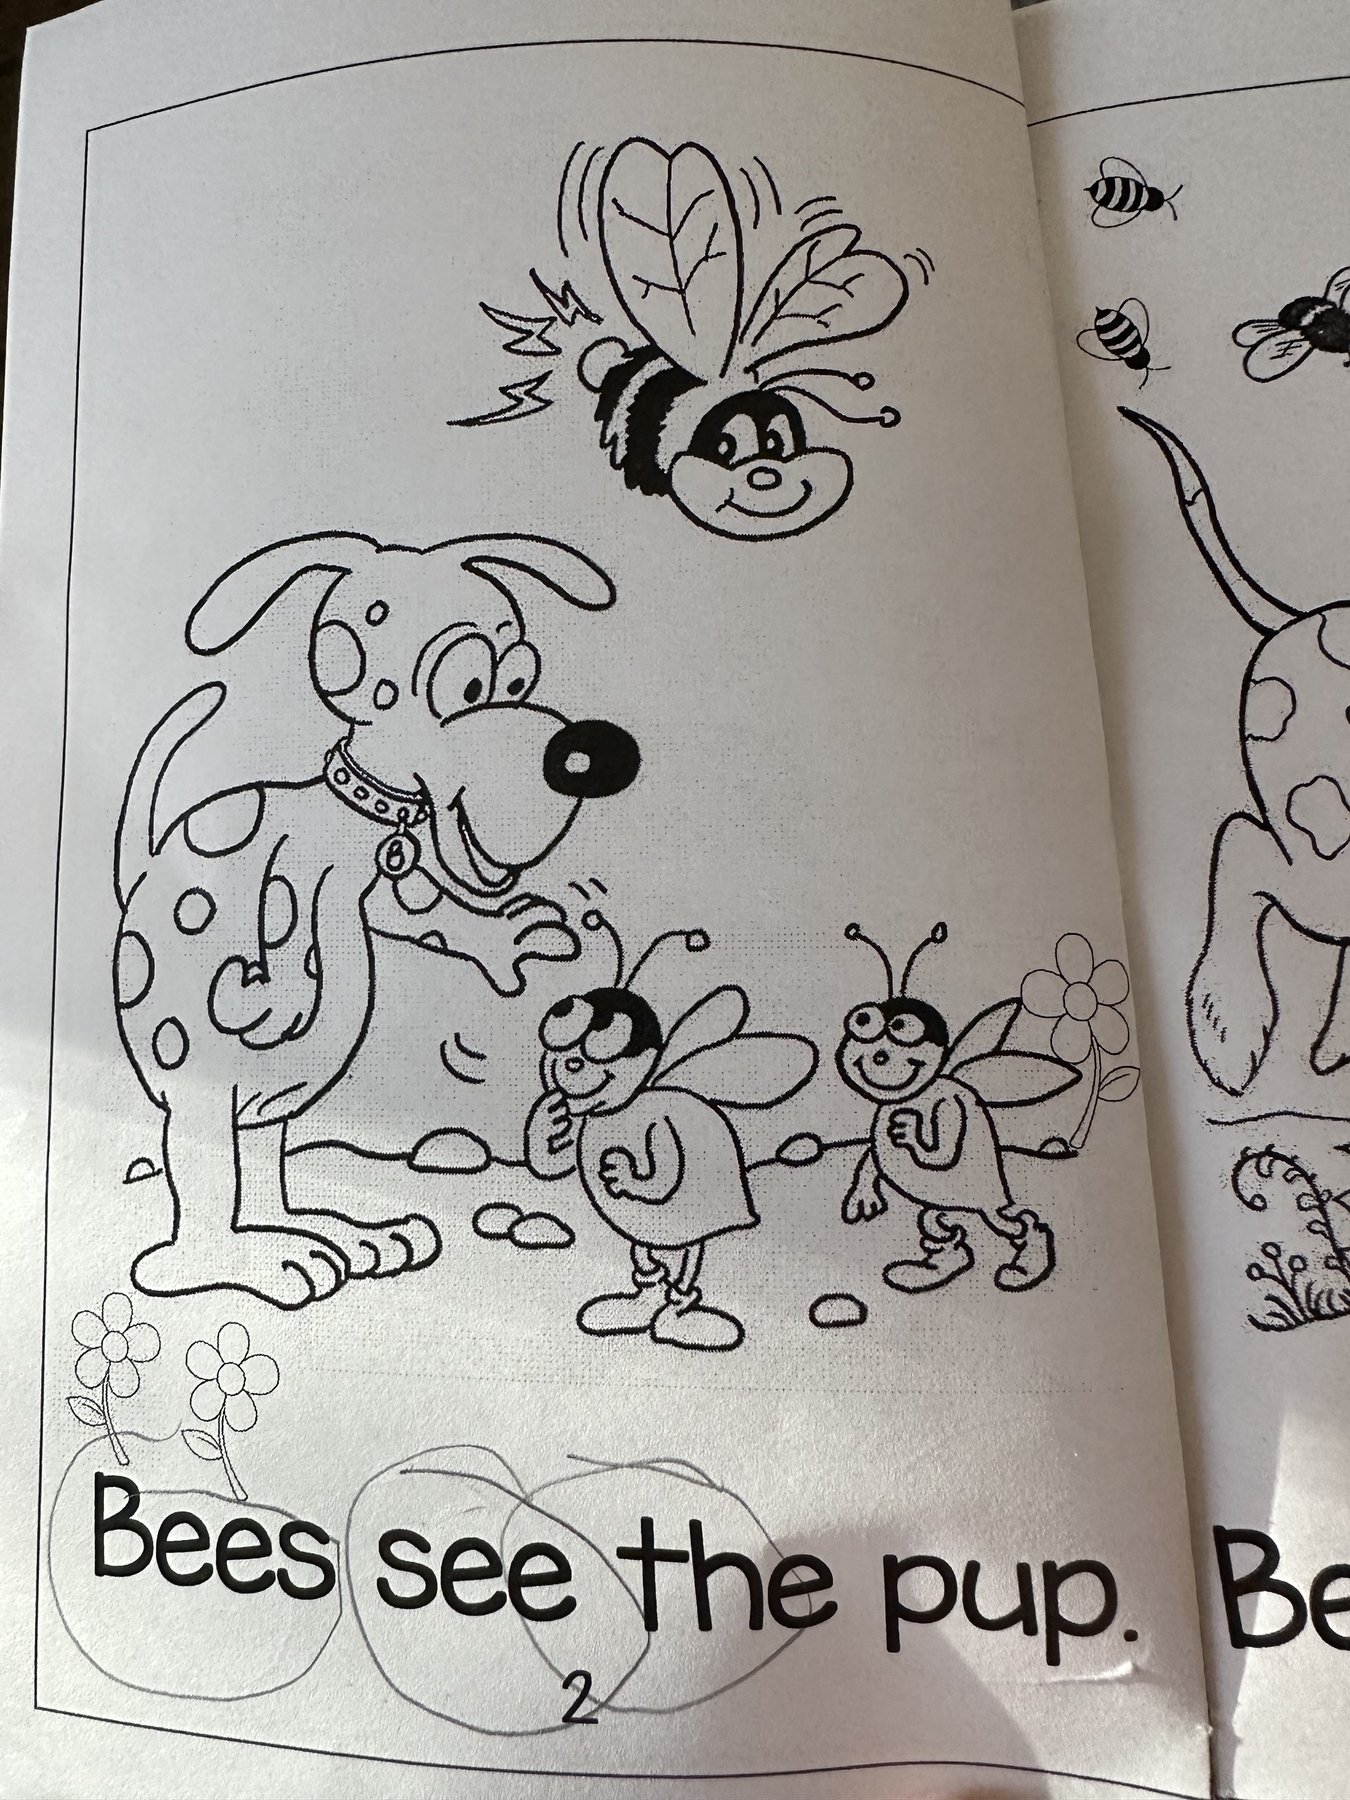 Bees see the pup - page 2